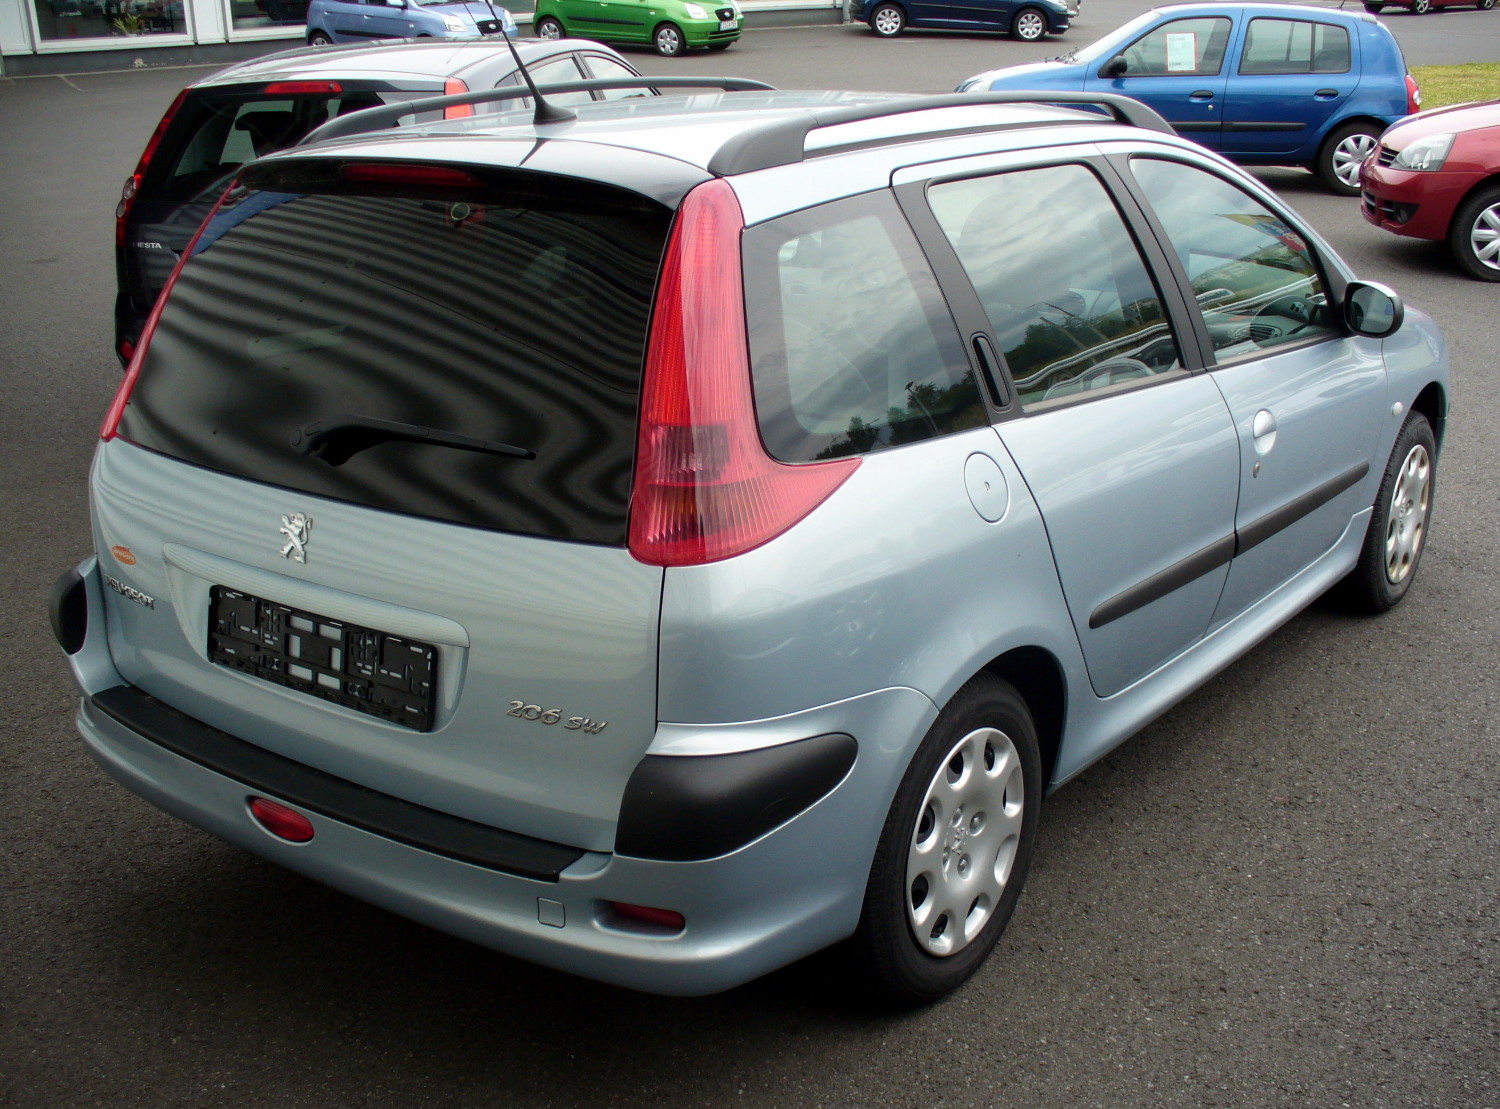 Peugeot 206 SW technical details, history, photos on